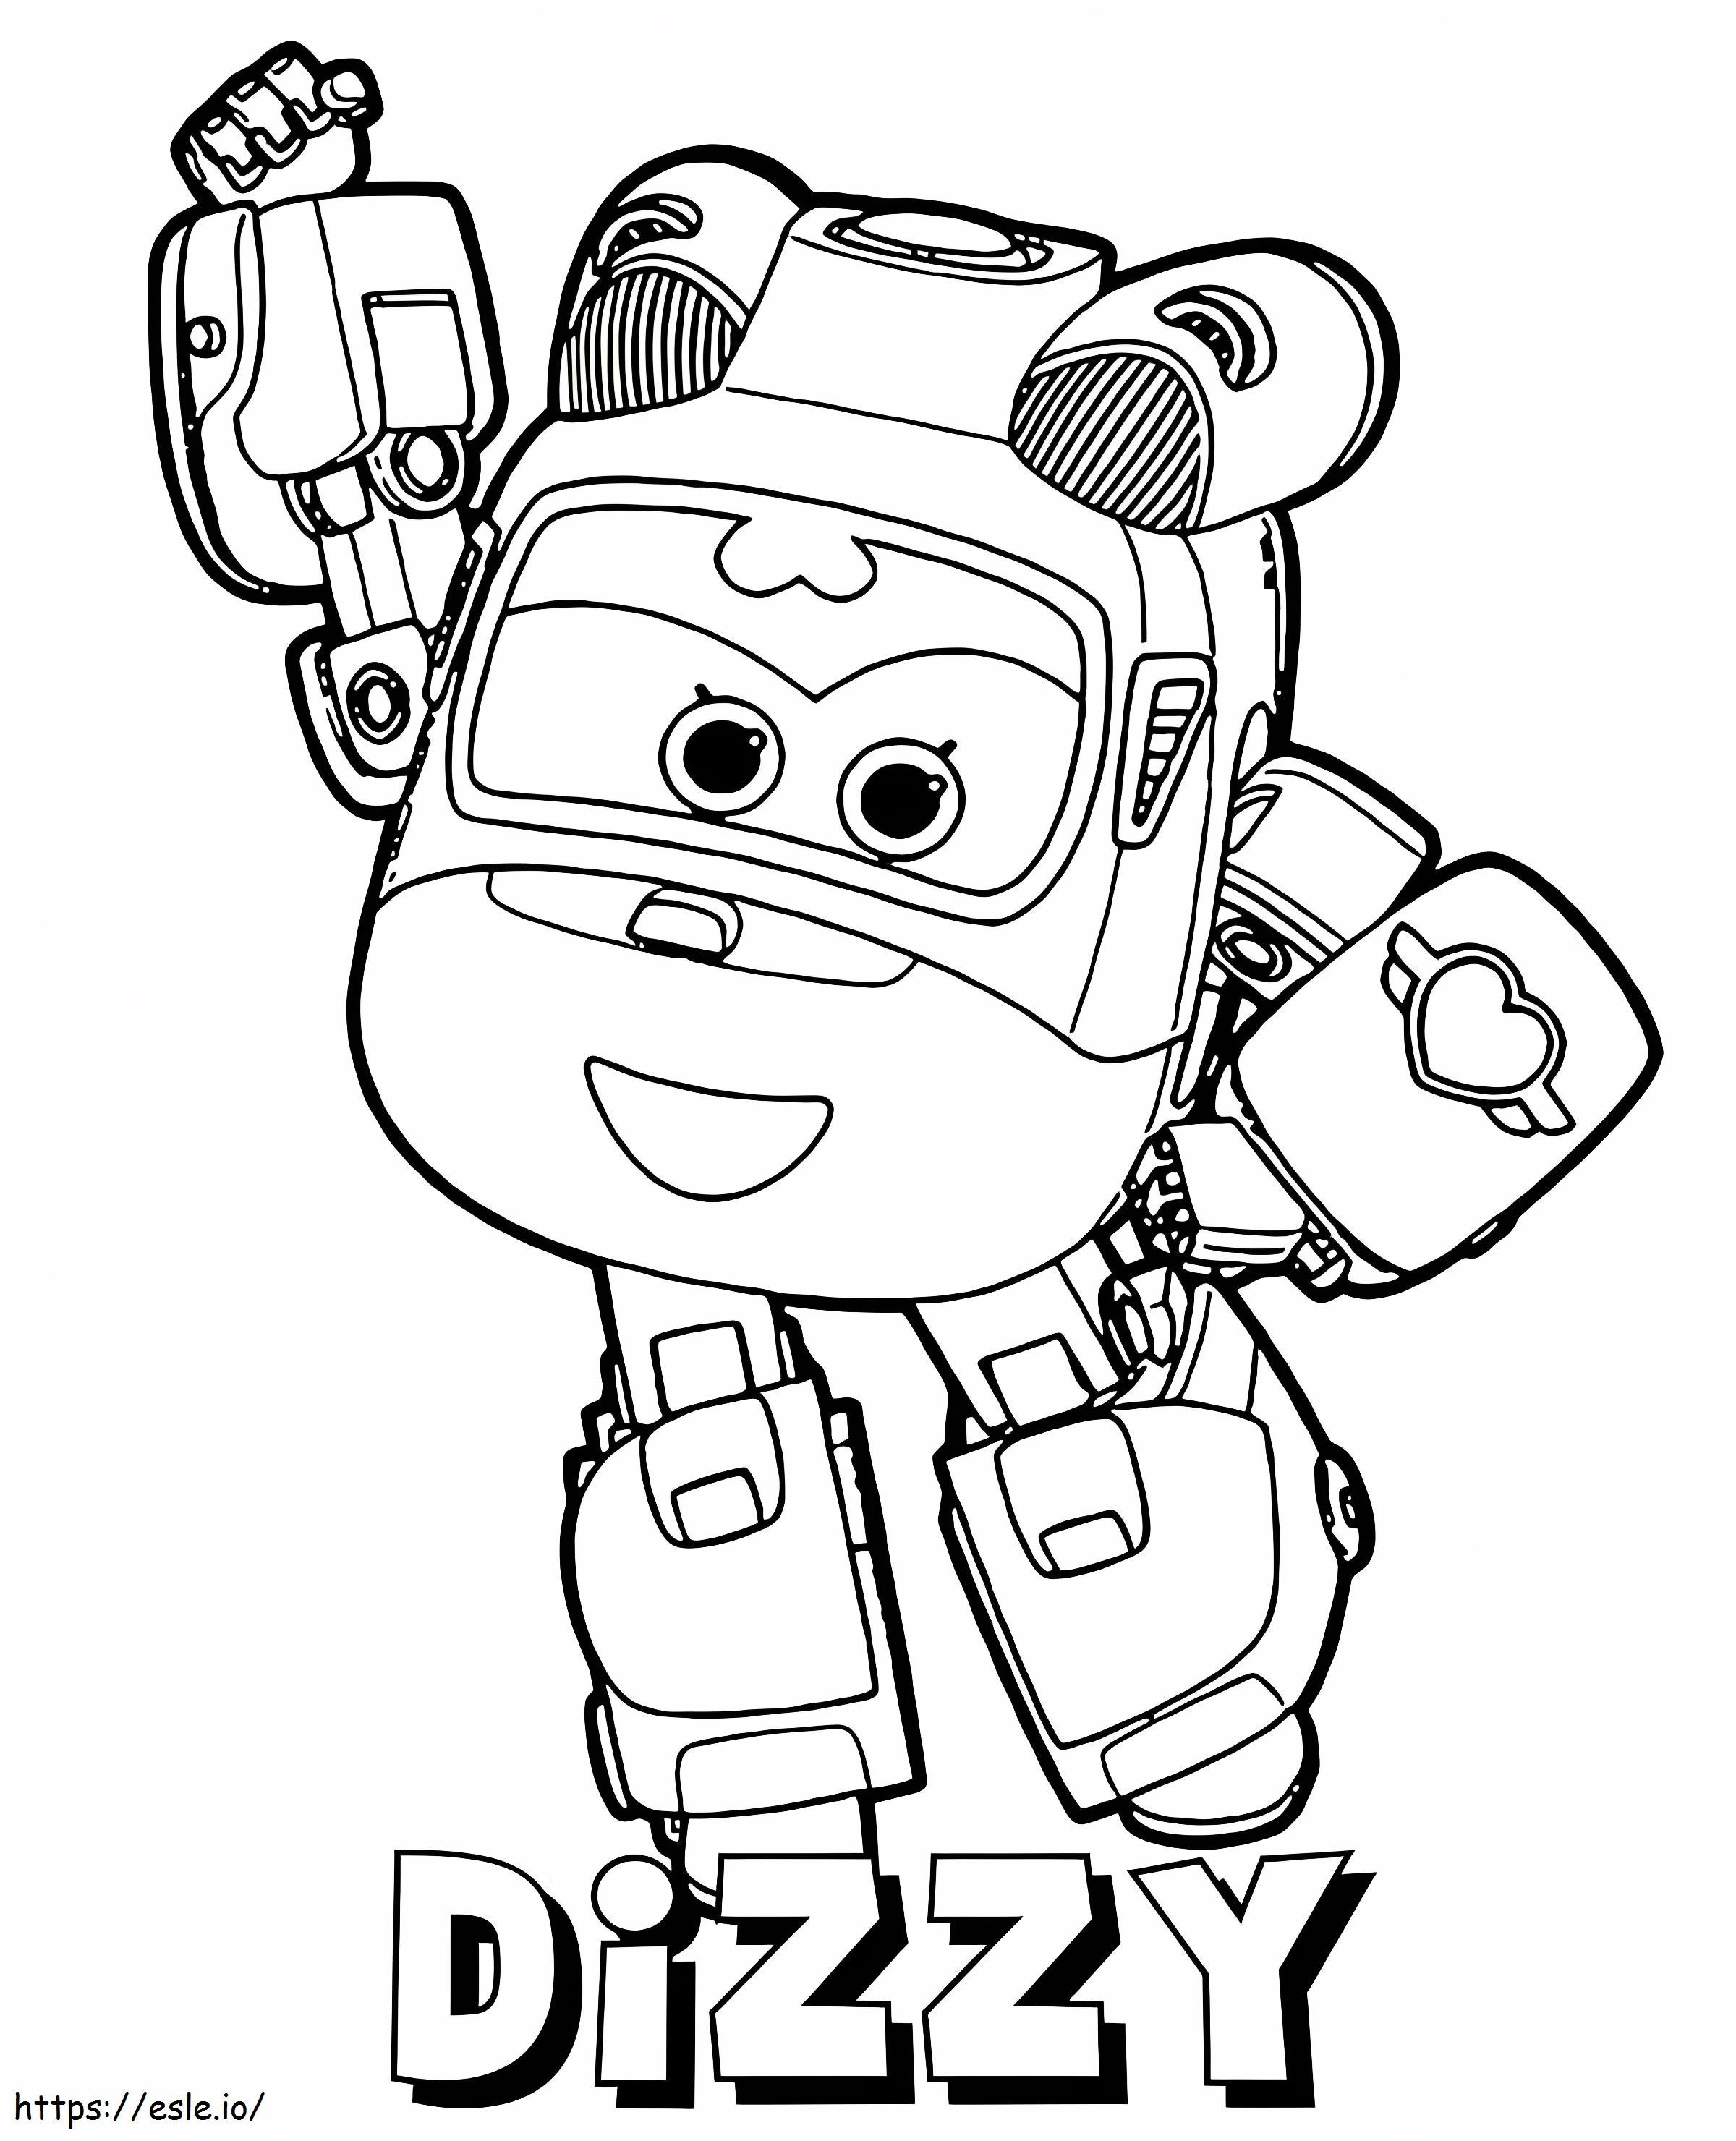 Dizzy Super Wings coloring page